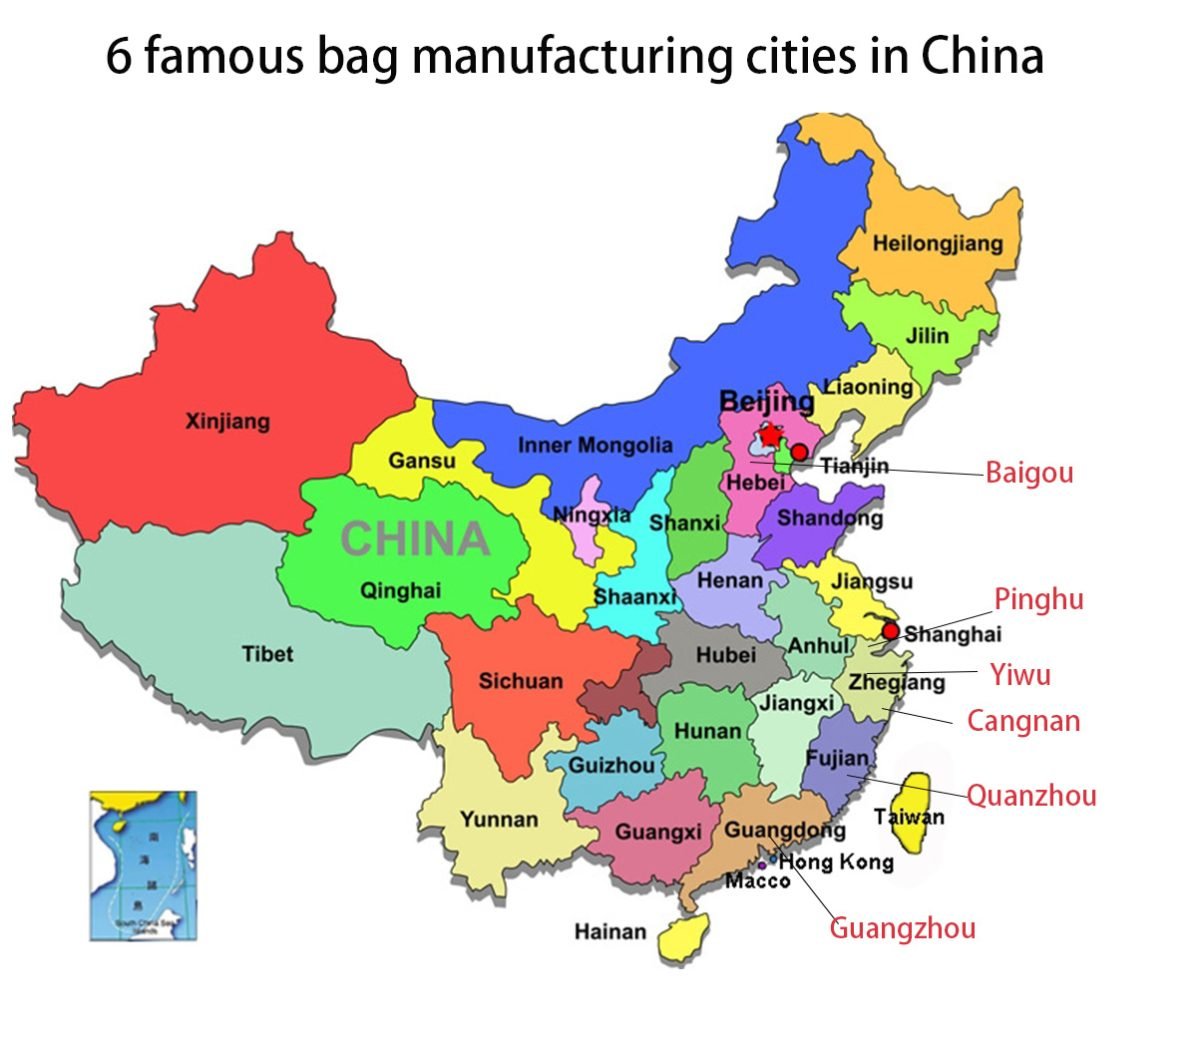 6 famous bag manufacturing cities in China